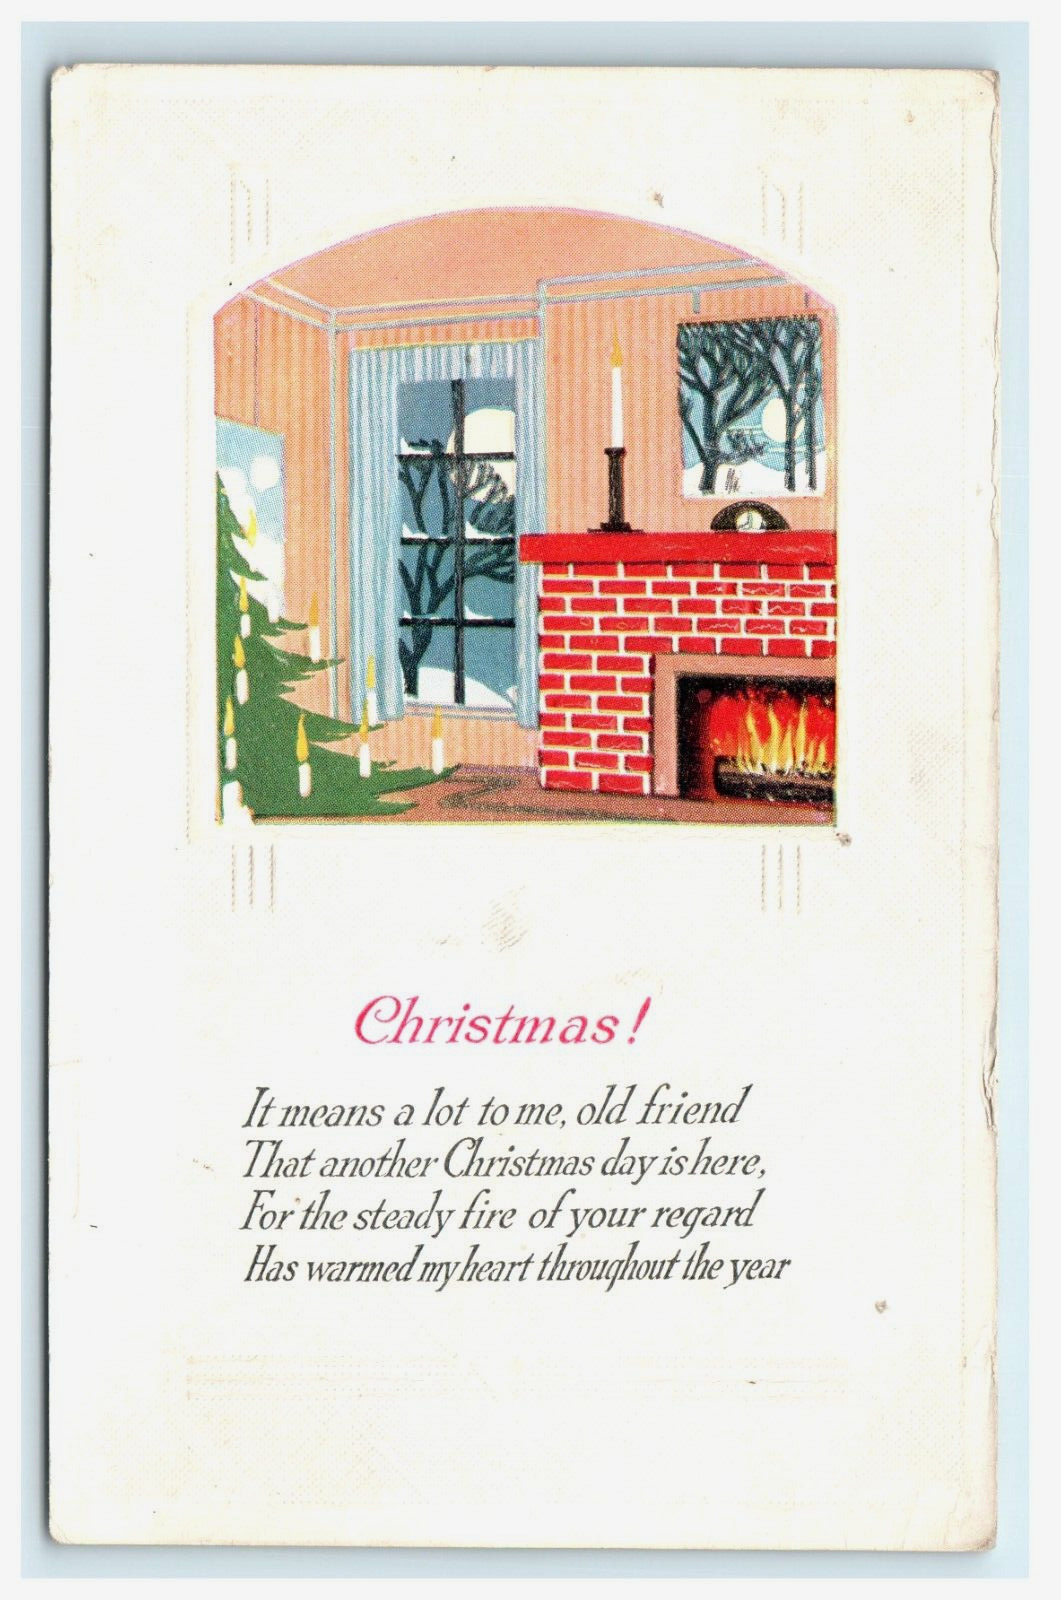 Christmas Domestic Fireplace Interior View Embossed - Damaged